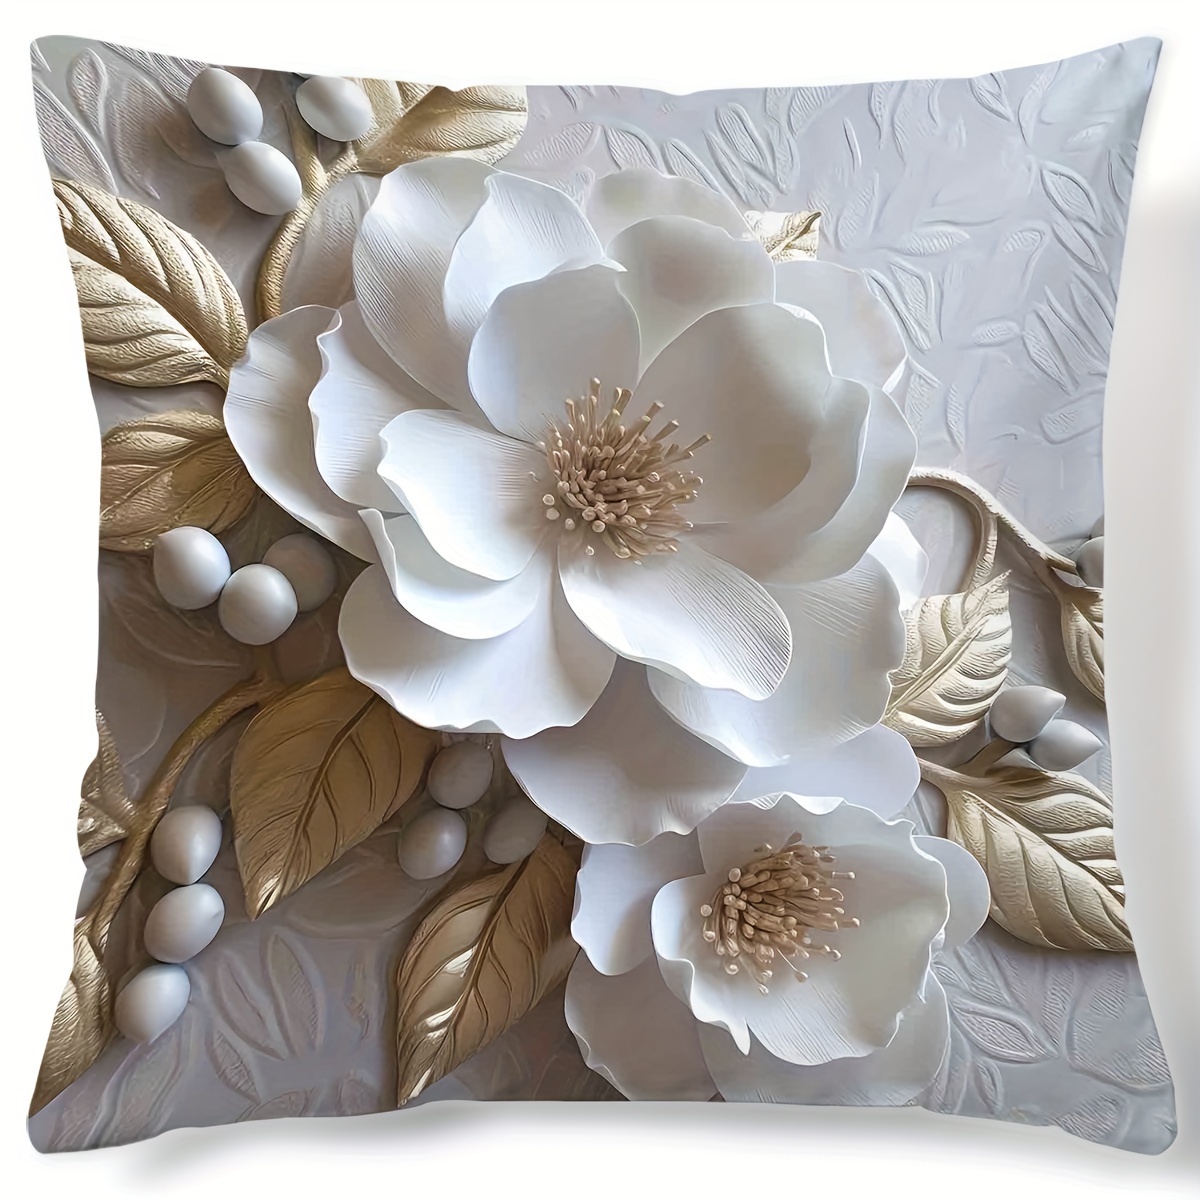 

1pc, Digital Printed Pillowcase With 3d Floral Pattern